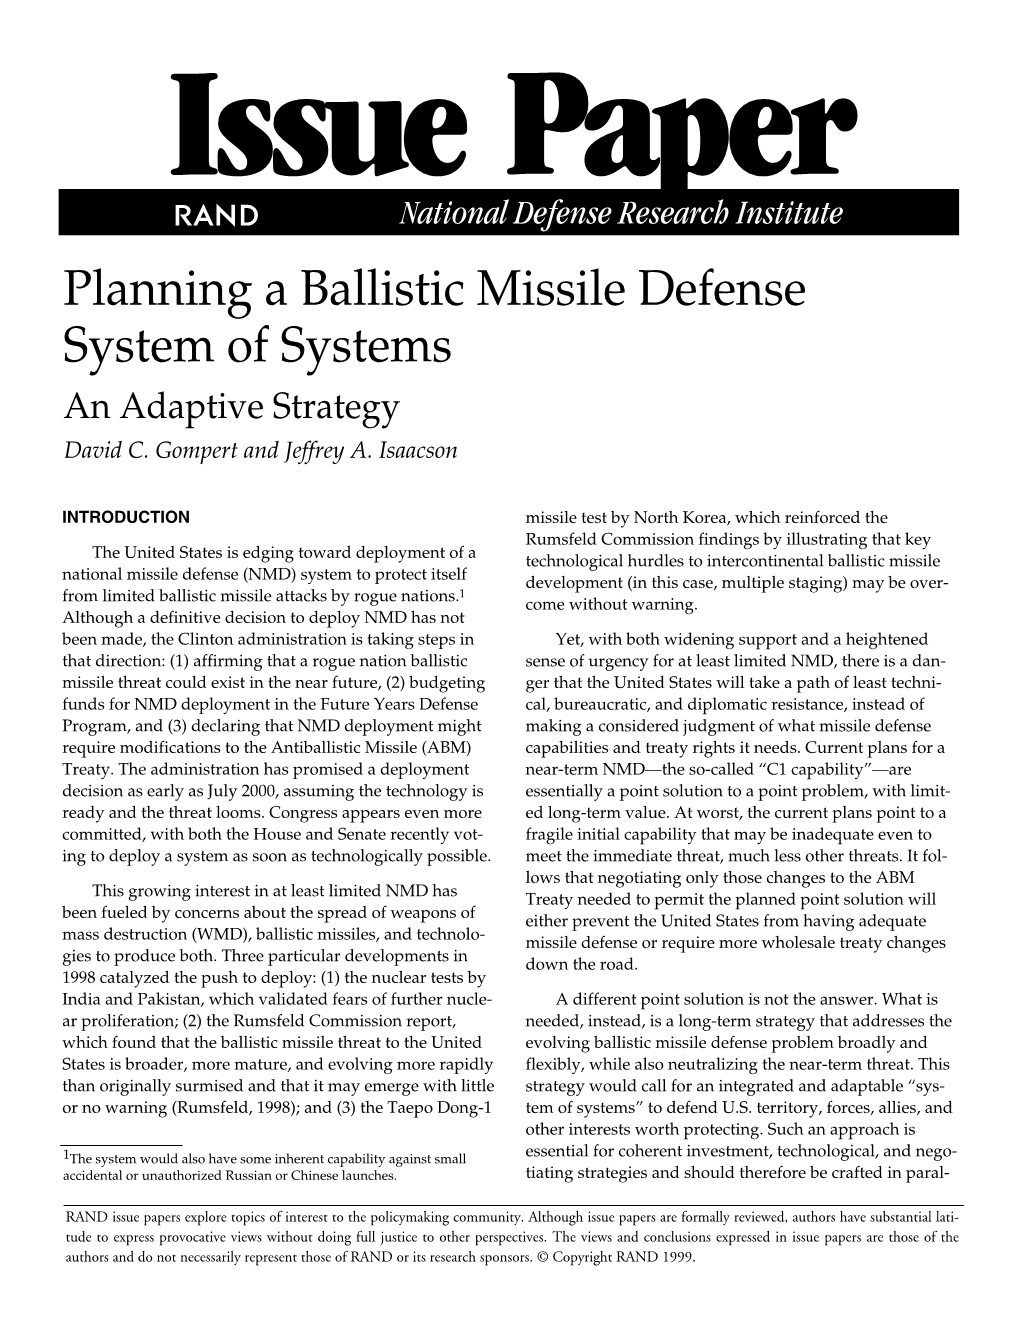 Planning a Ballistic Missile Defense System of Systems: an Adaptive